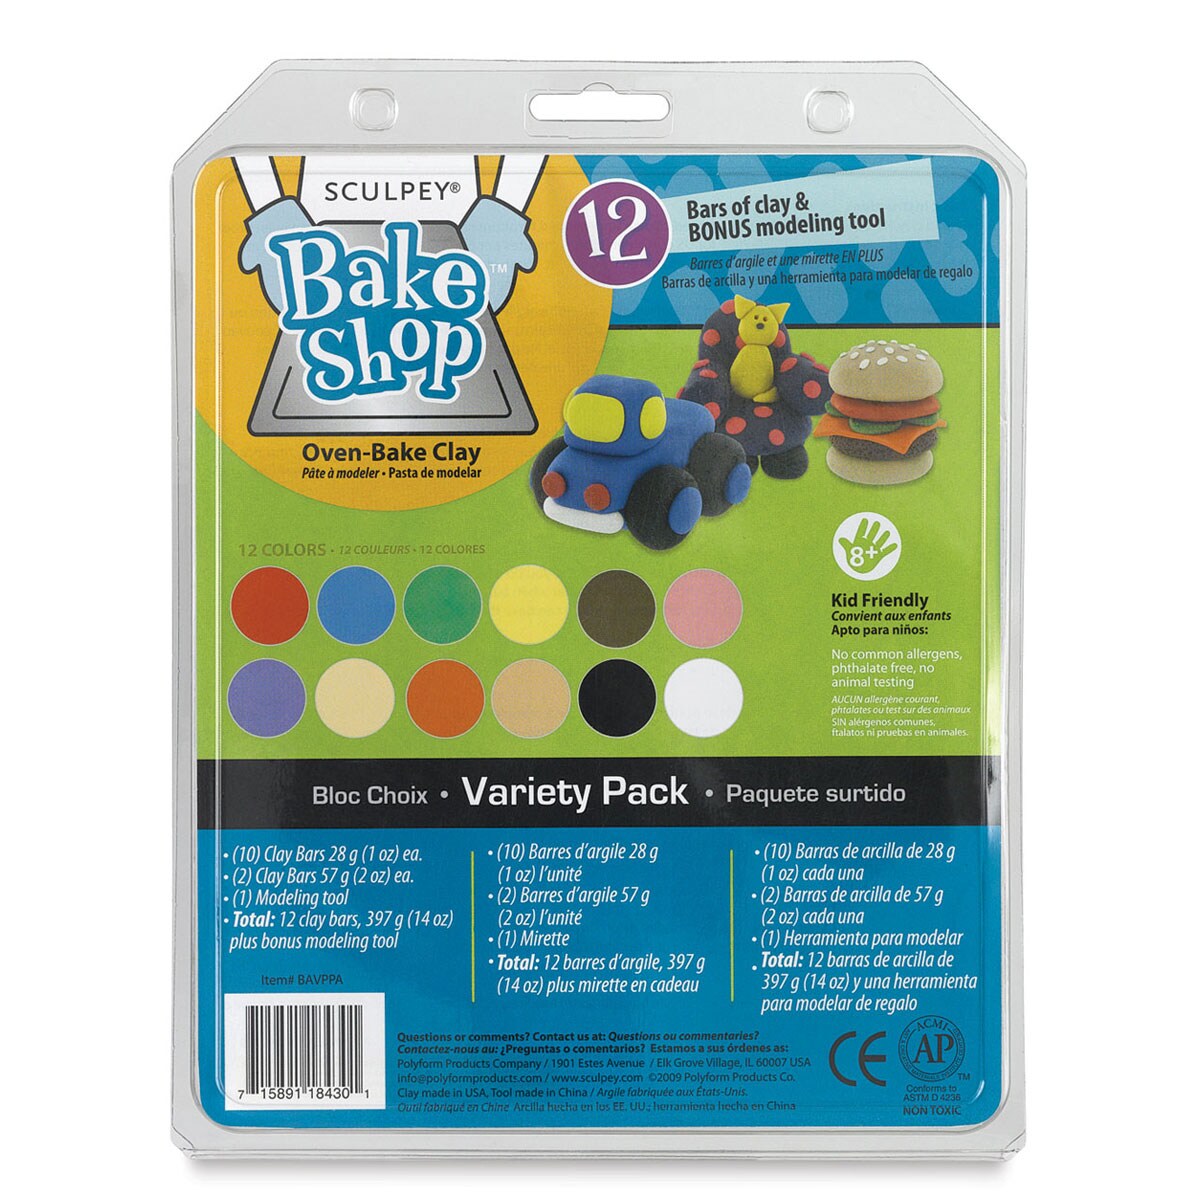 Sculpey Bake Shop Oven-Bake Clay Variety Pack - Set of 12